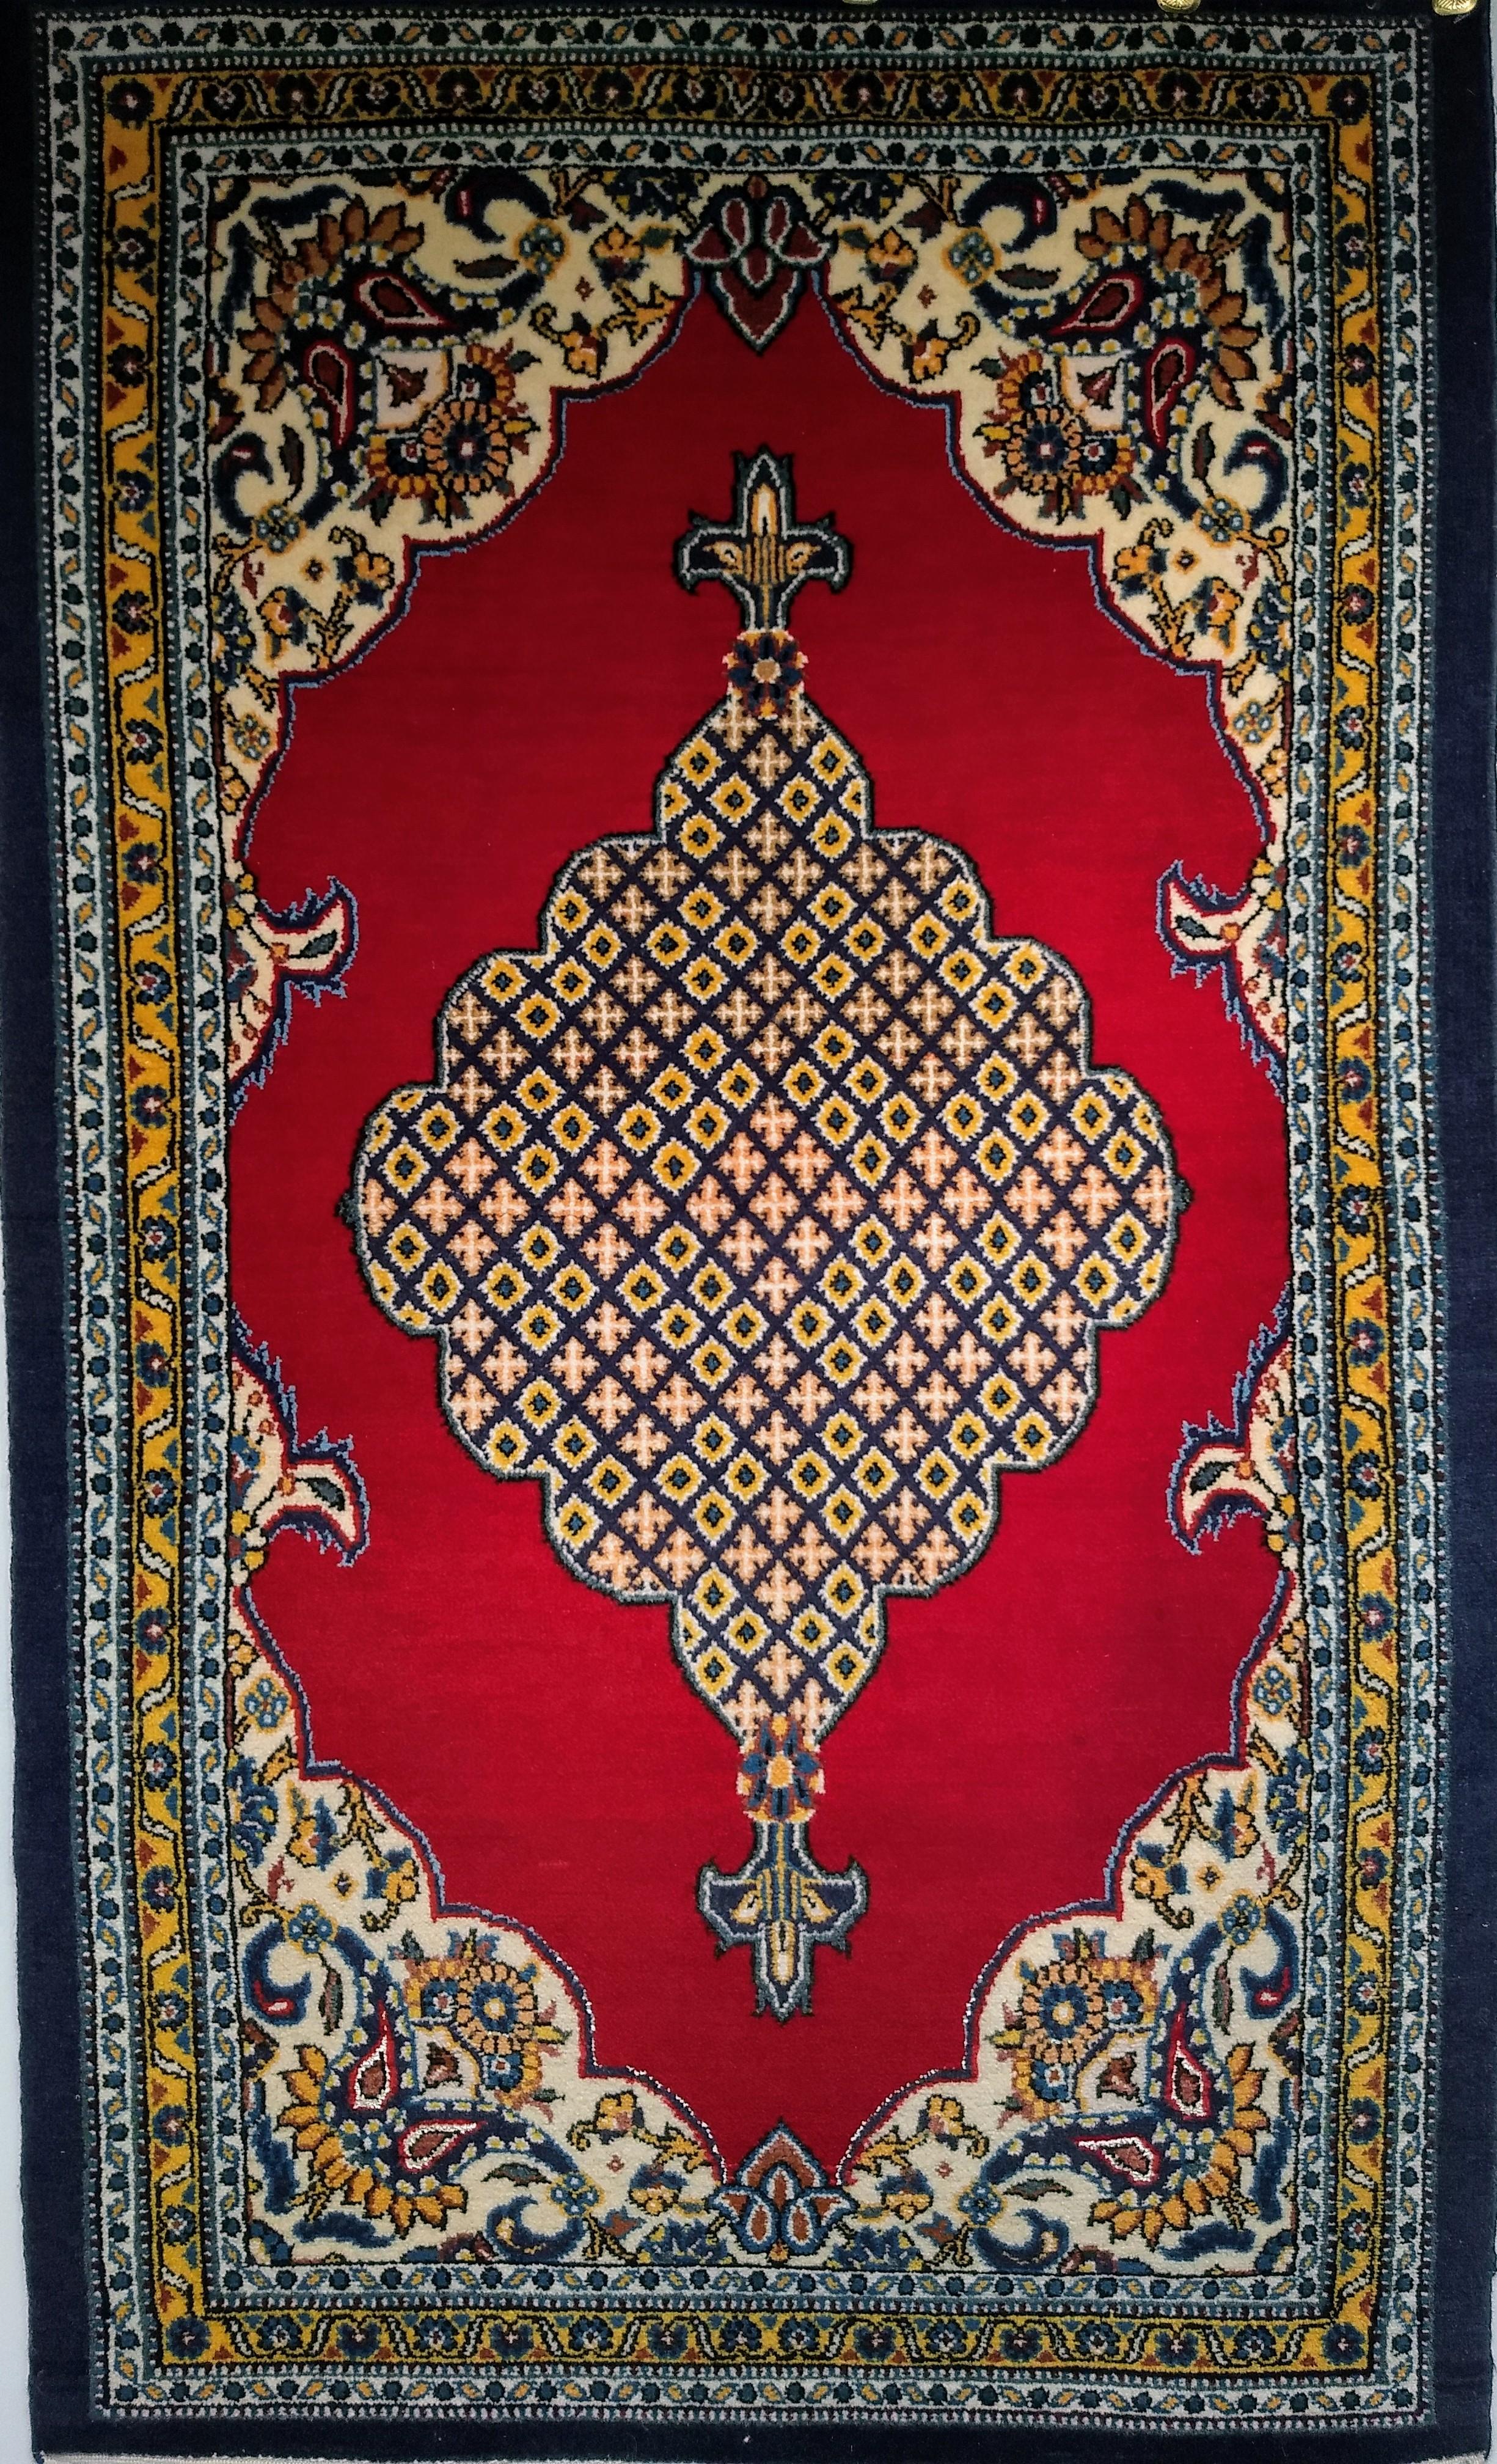 Vintage Persian Qum area rug in a geometric medallion pattern circa the mid 1900s.  The strikingly beautiful bright red field sets the stage to showcase this wonderful small area rug from one of the finest weaving centers in Persia.  The beautiful